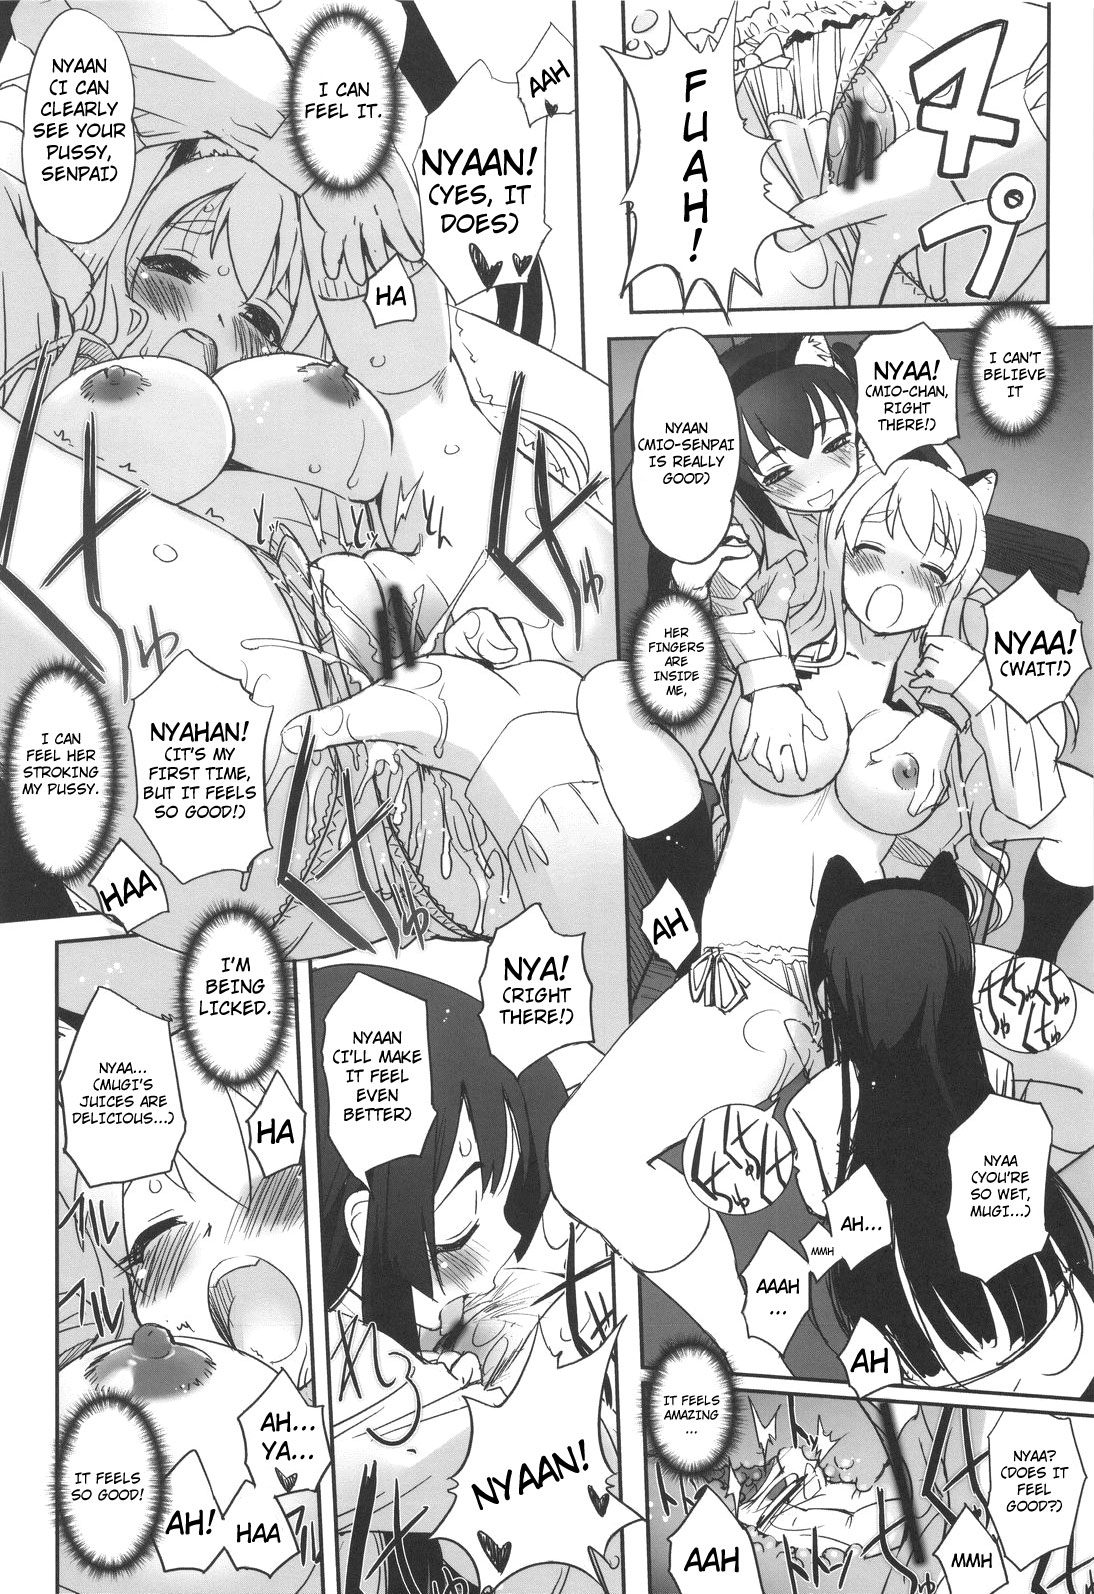 (C76) [G-Power! (Sasayuki)] Nekomimi to Toilet to Houkago no Bushitsu | Cat Ears And A Restroom And The Club Room After School (K-ON) [English] [Nicchiscans-4Dawgz] page 21 full